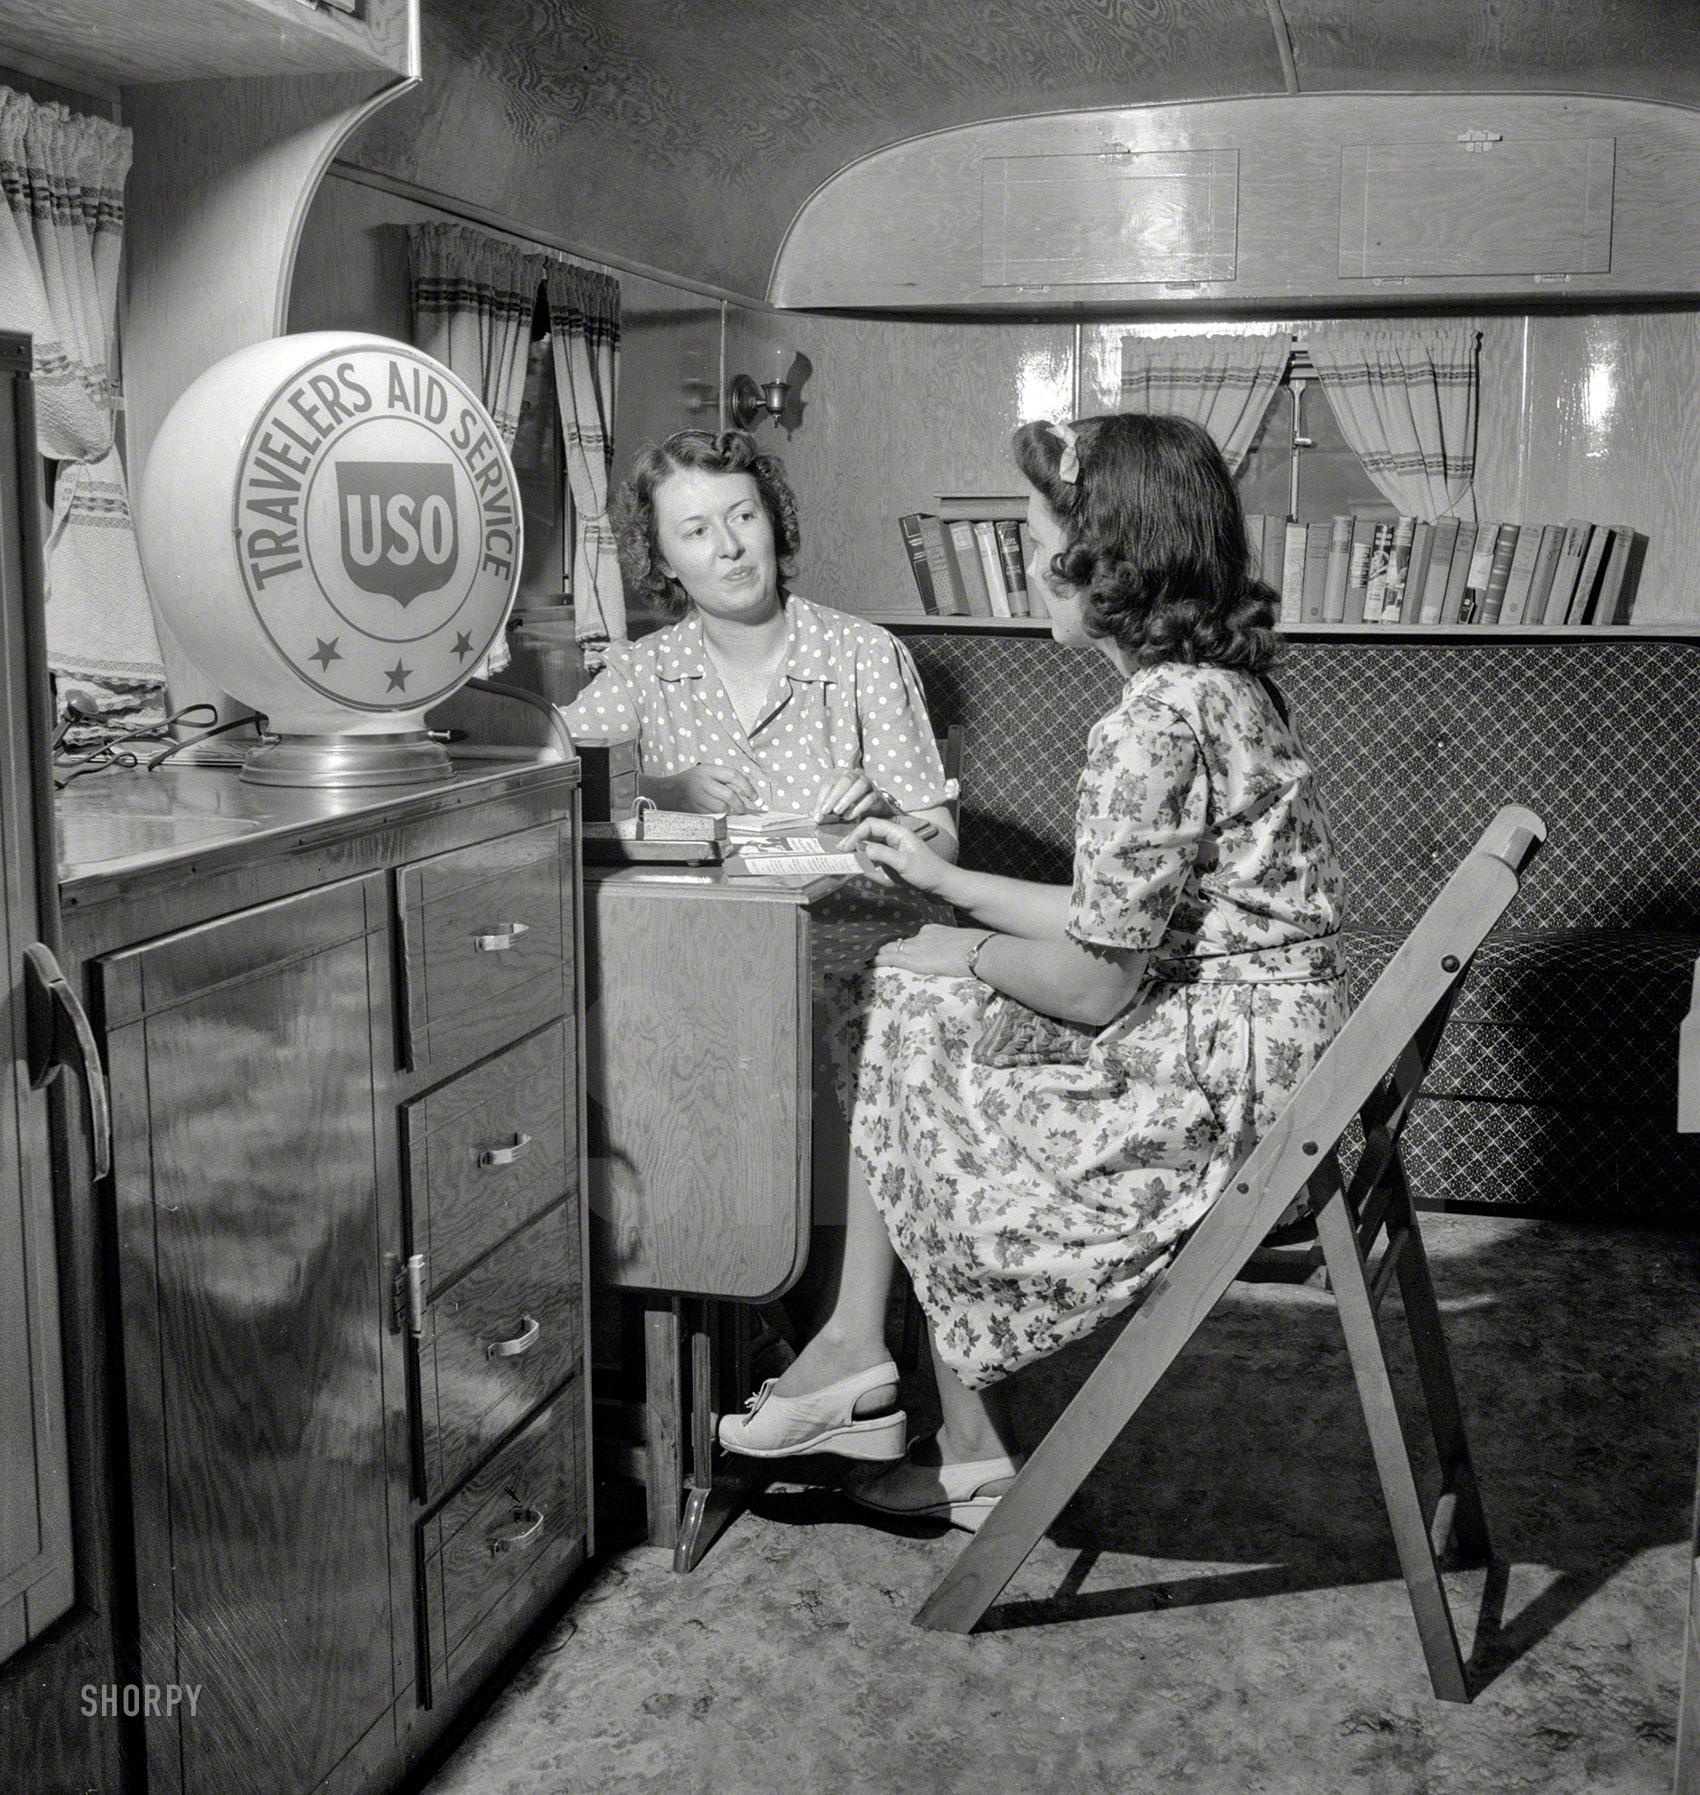 August 1943. "Middle River, a small crossroads in the vicinity of Baltimore, Maryland. Farm Security Administration housing project for Martin aircraft workers. Mrs. Helen Bird, USO traveler's aide, giving information to a newcomer in the Glenn L. Martin trailer village." Photo by John Collier. View full size.